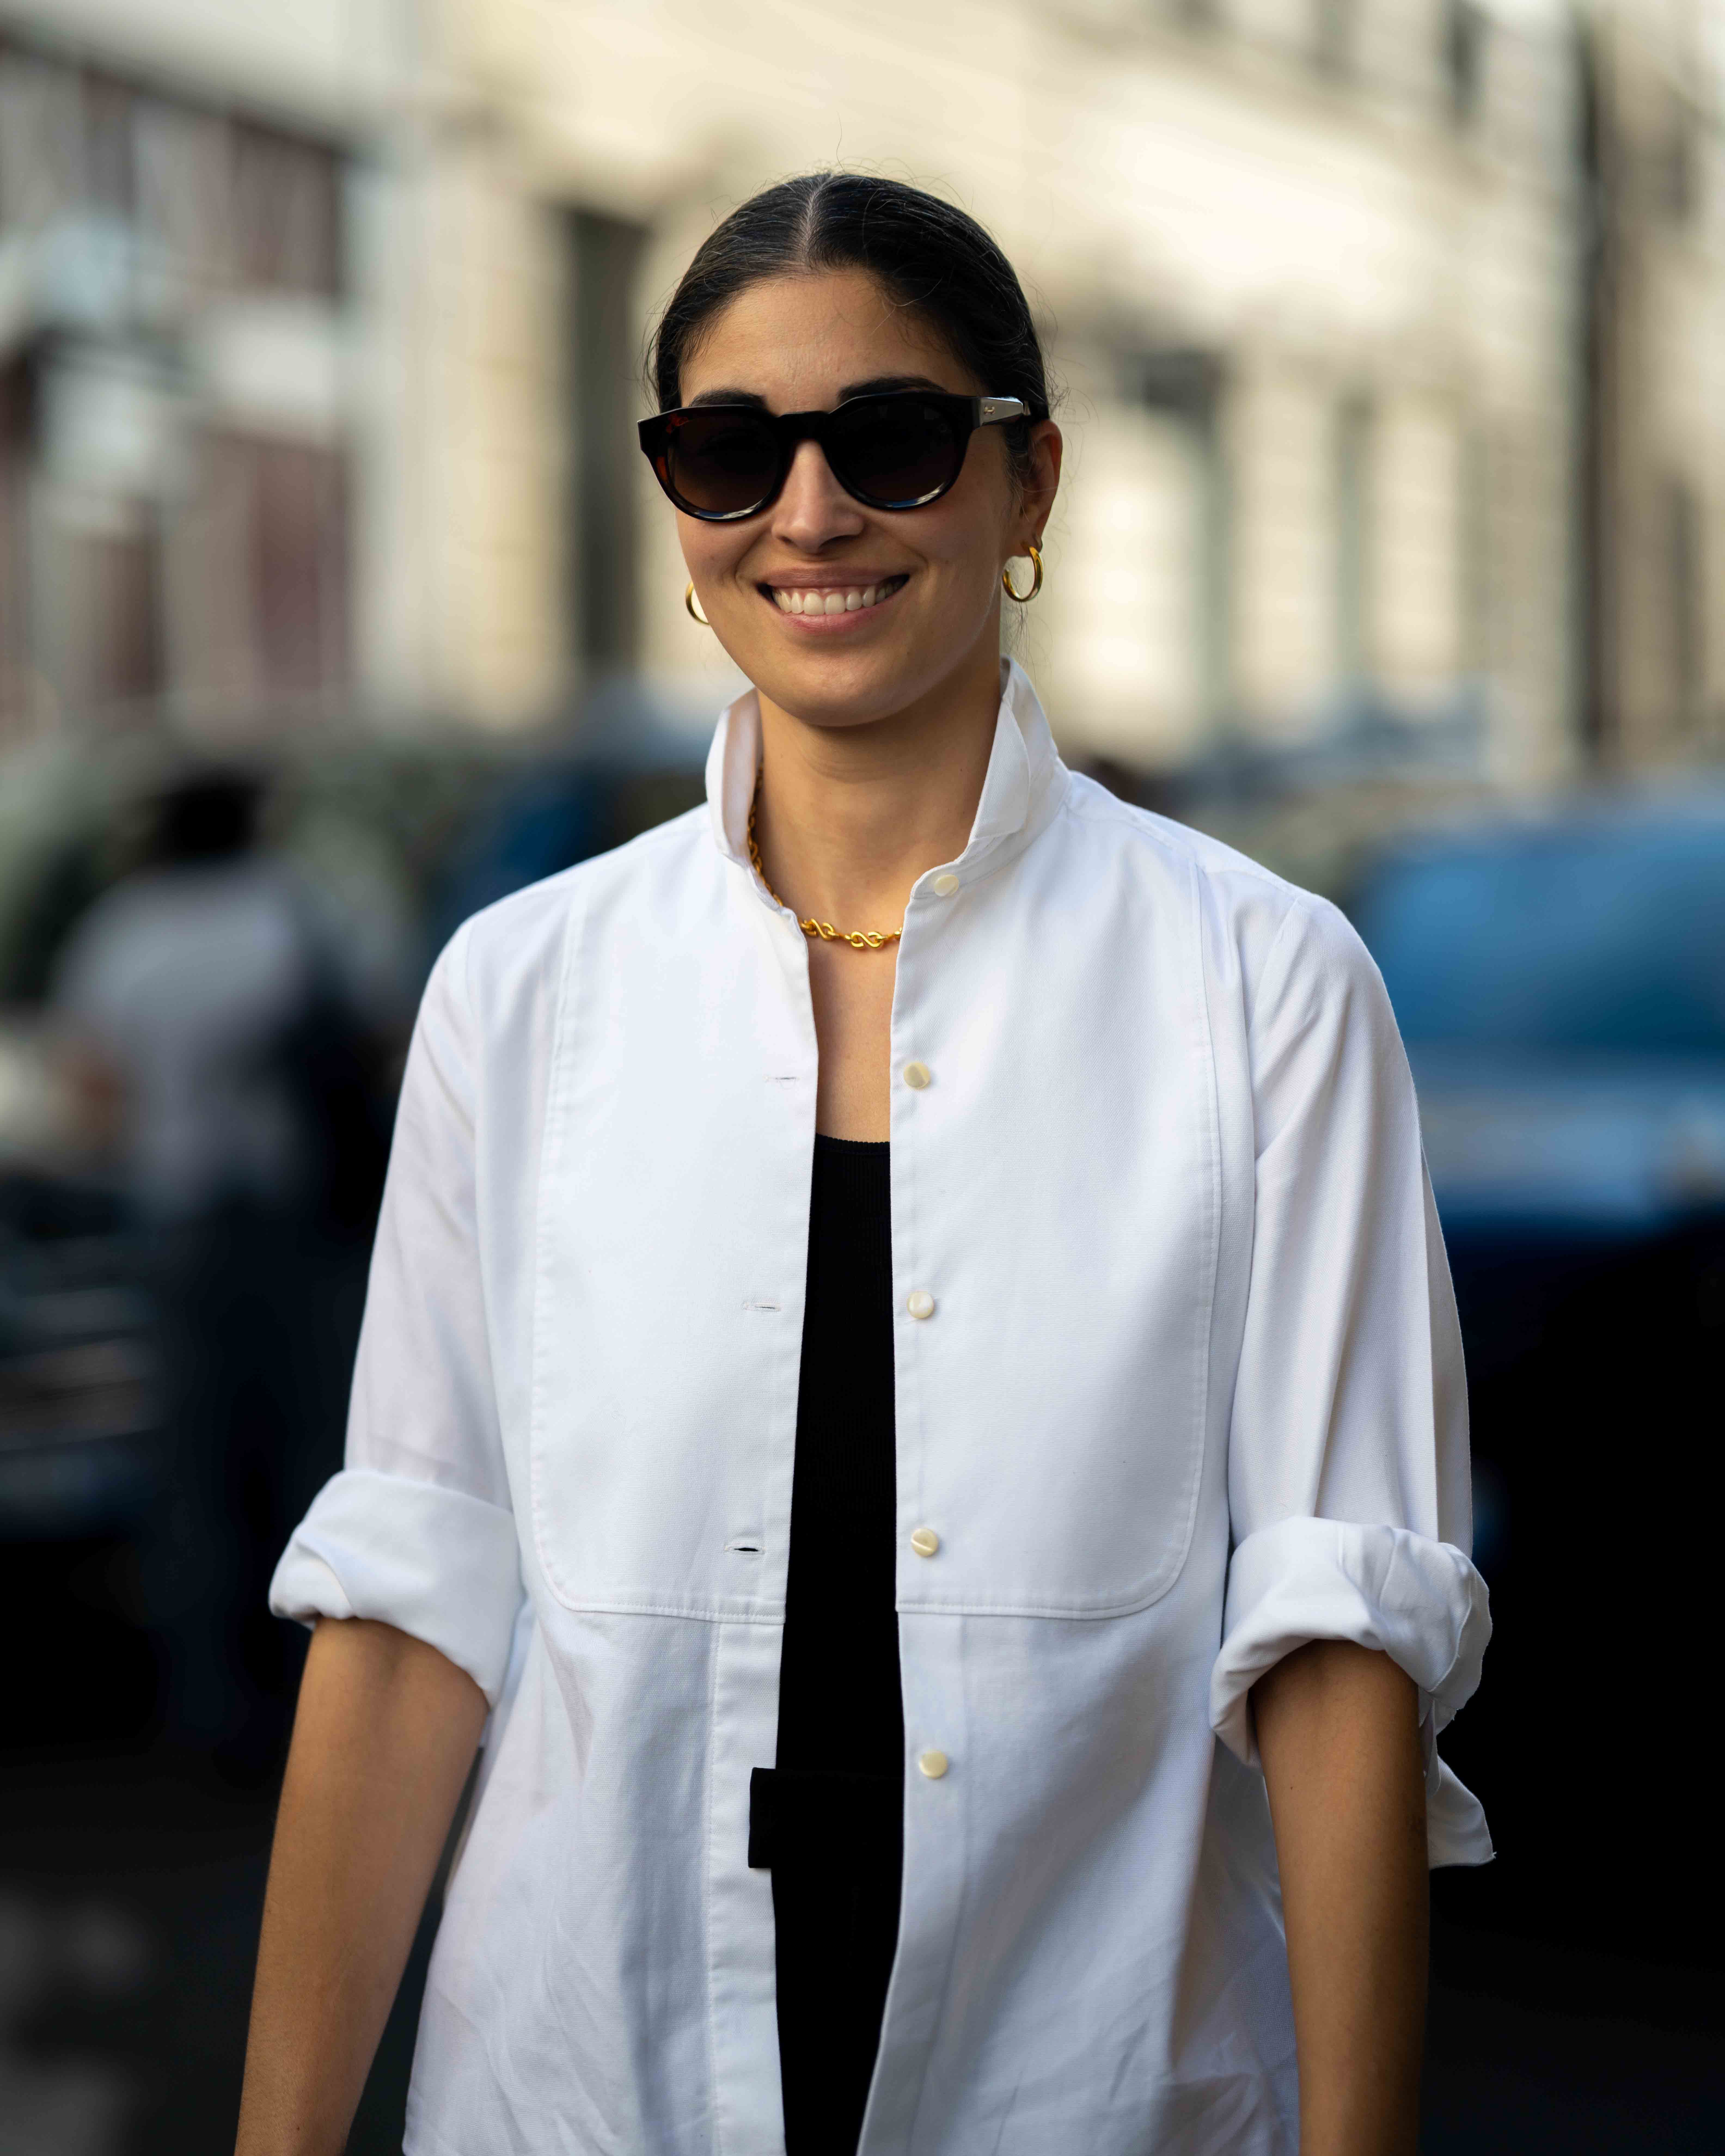 Caroline Issa wears a white dress shirt, open, with a black top underneath and dark sunglasses.
Street Style After Valentino SS24 Paris Fashion Week